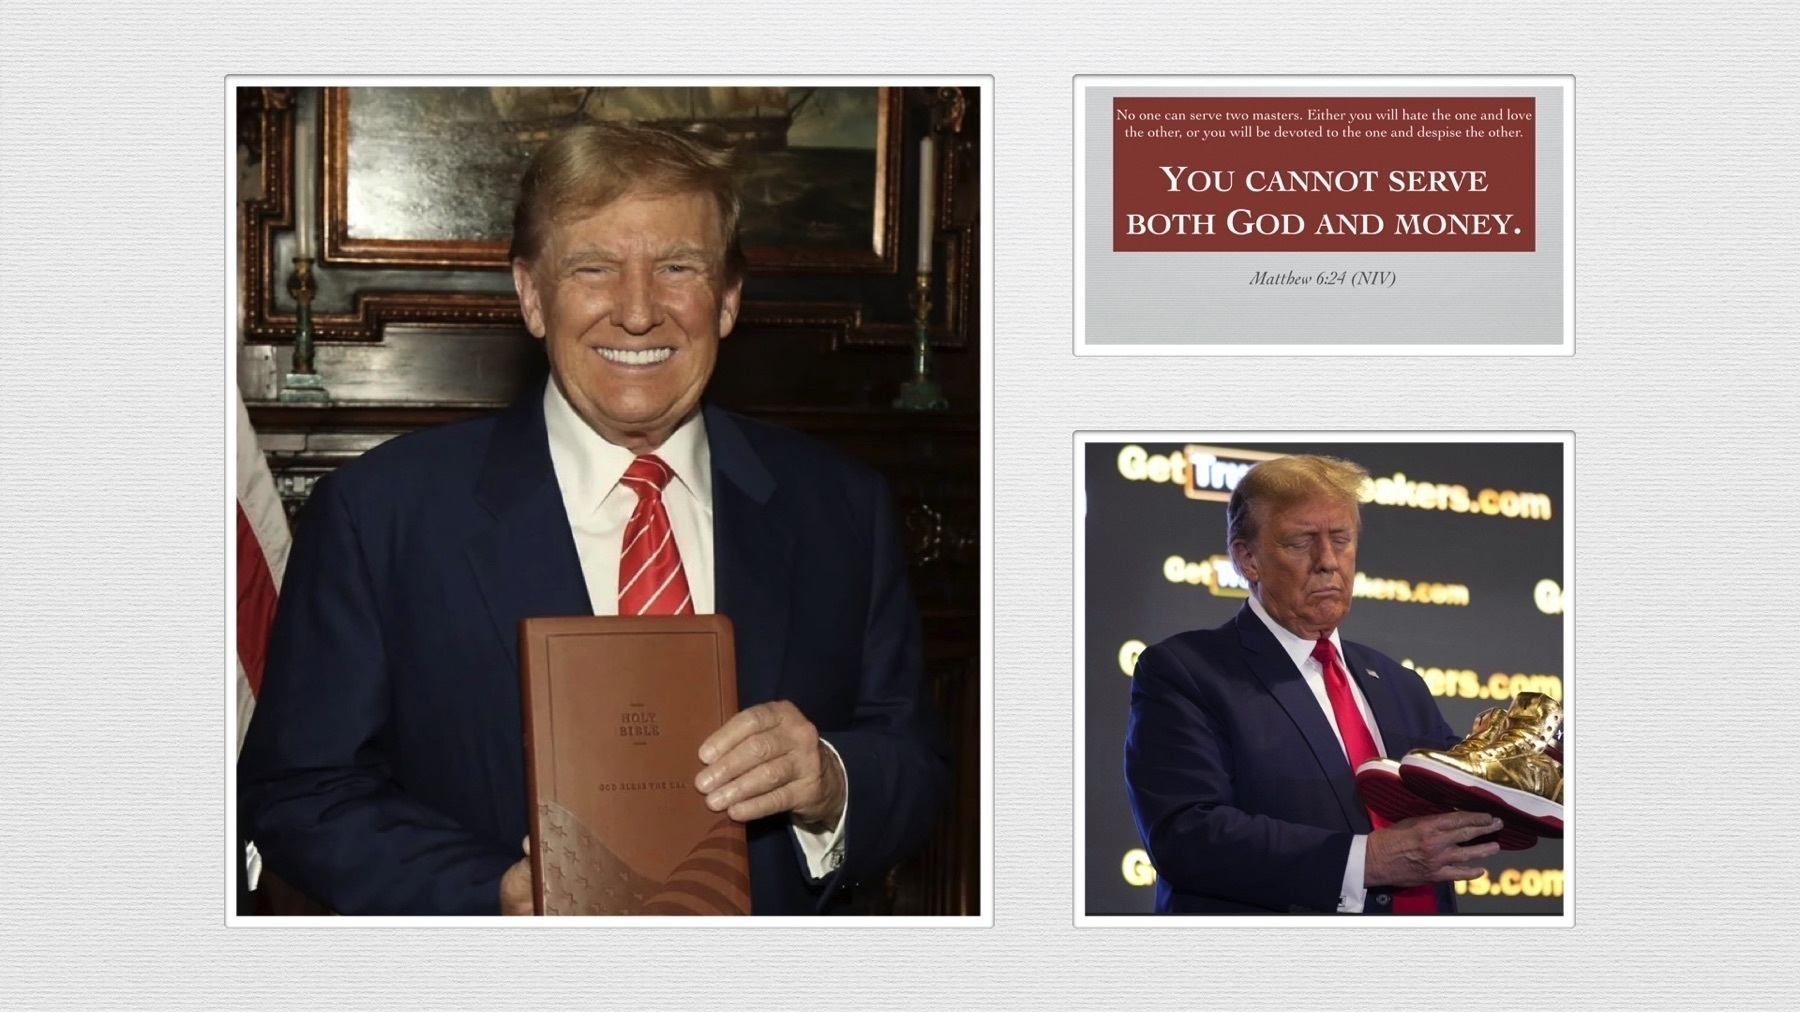 A smiling, criminally indicted former president holding a Bible he’s selling for $59.99 plus shipping and handling, a somber criminally indicted former president holding gold footwear he sold for $399 juxtaposed against contrasting formal backgrounds. Text: "You cannot serve both God and money. Matthew 6:24 (NIV)"